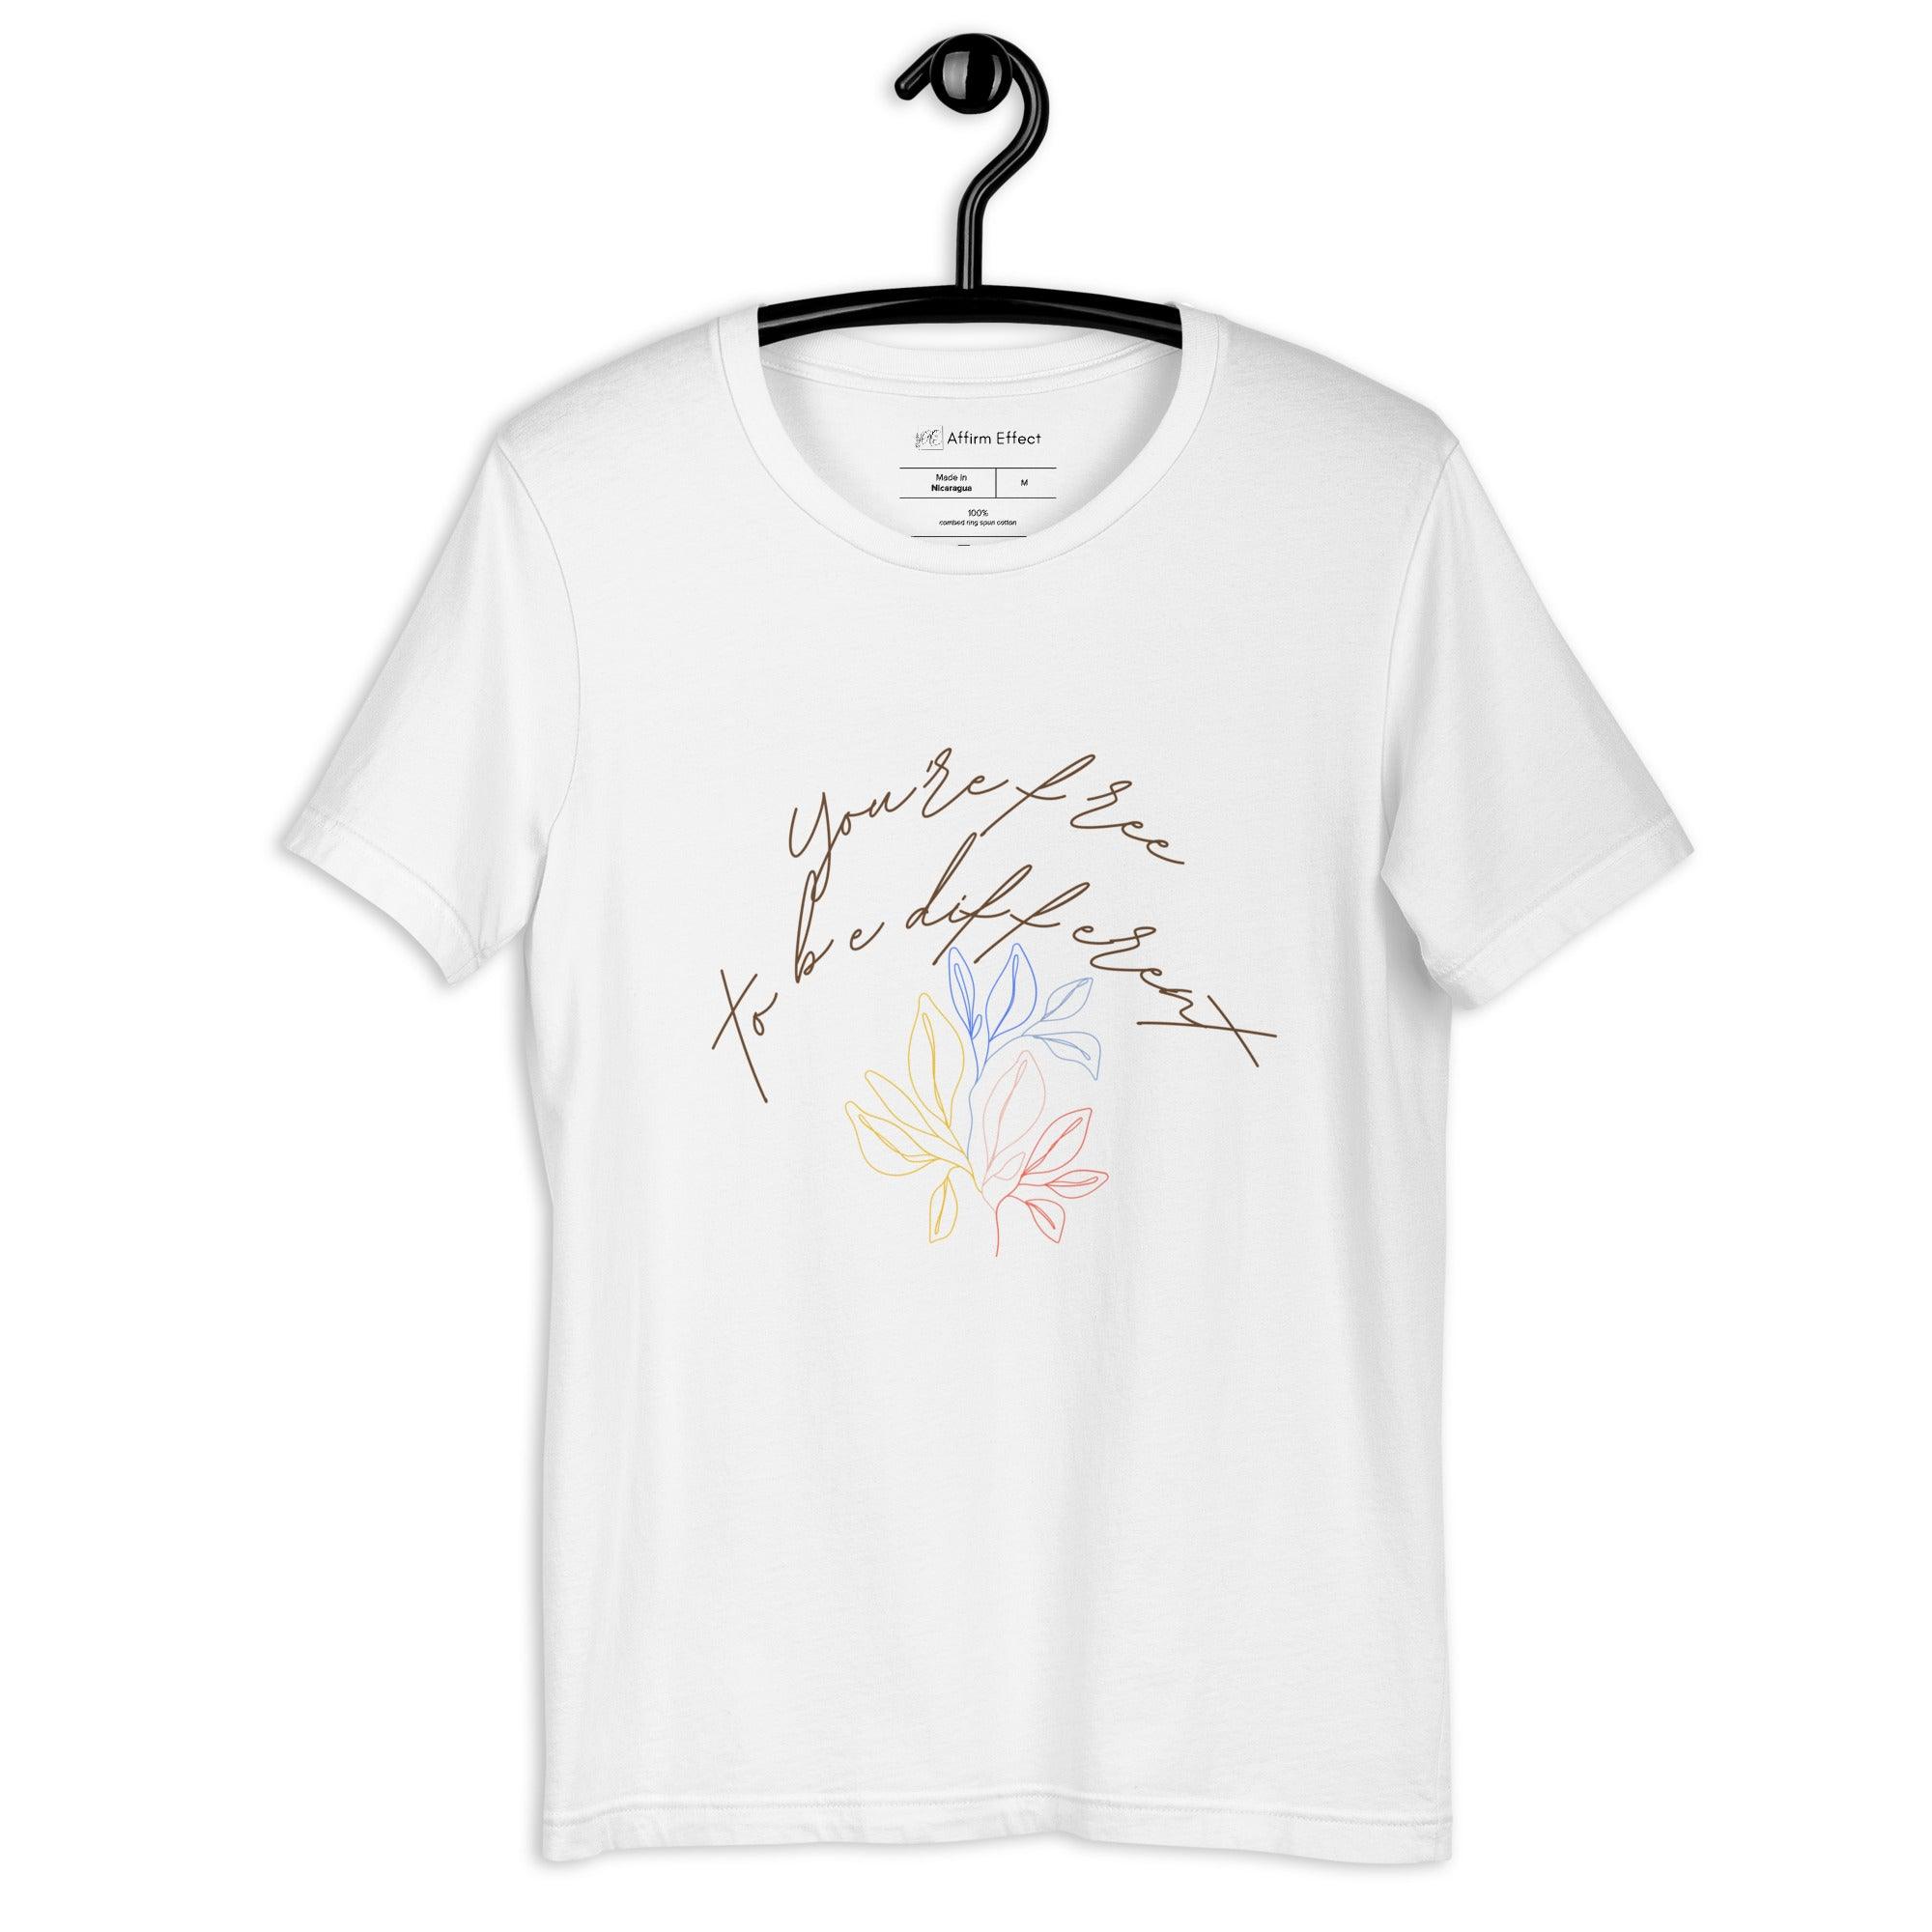 You Are Free To Be Different, Premium Short-Sleeve Unisex T-Shirt | Positive Affirmation Tee - Affirm Effect